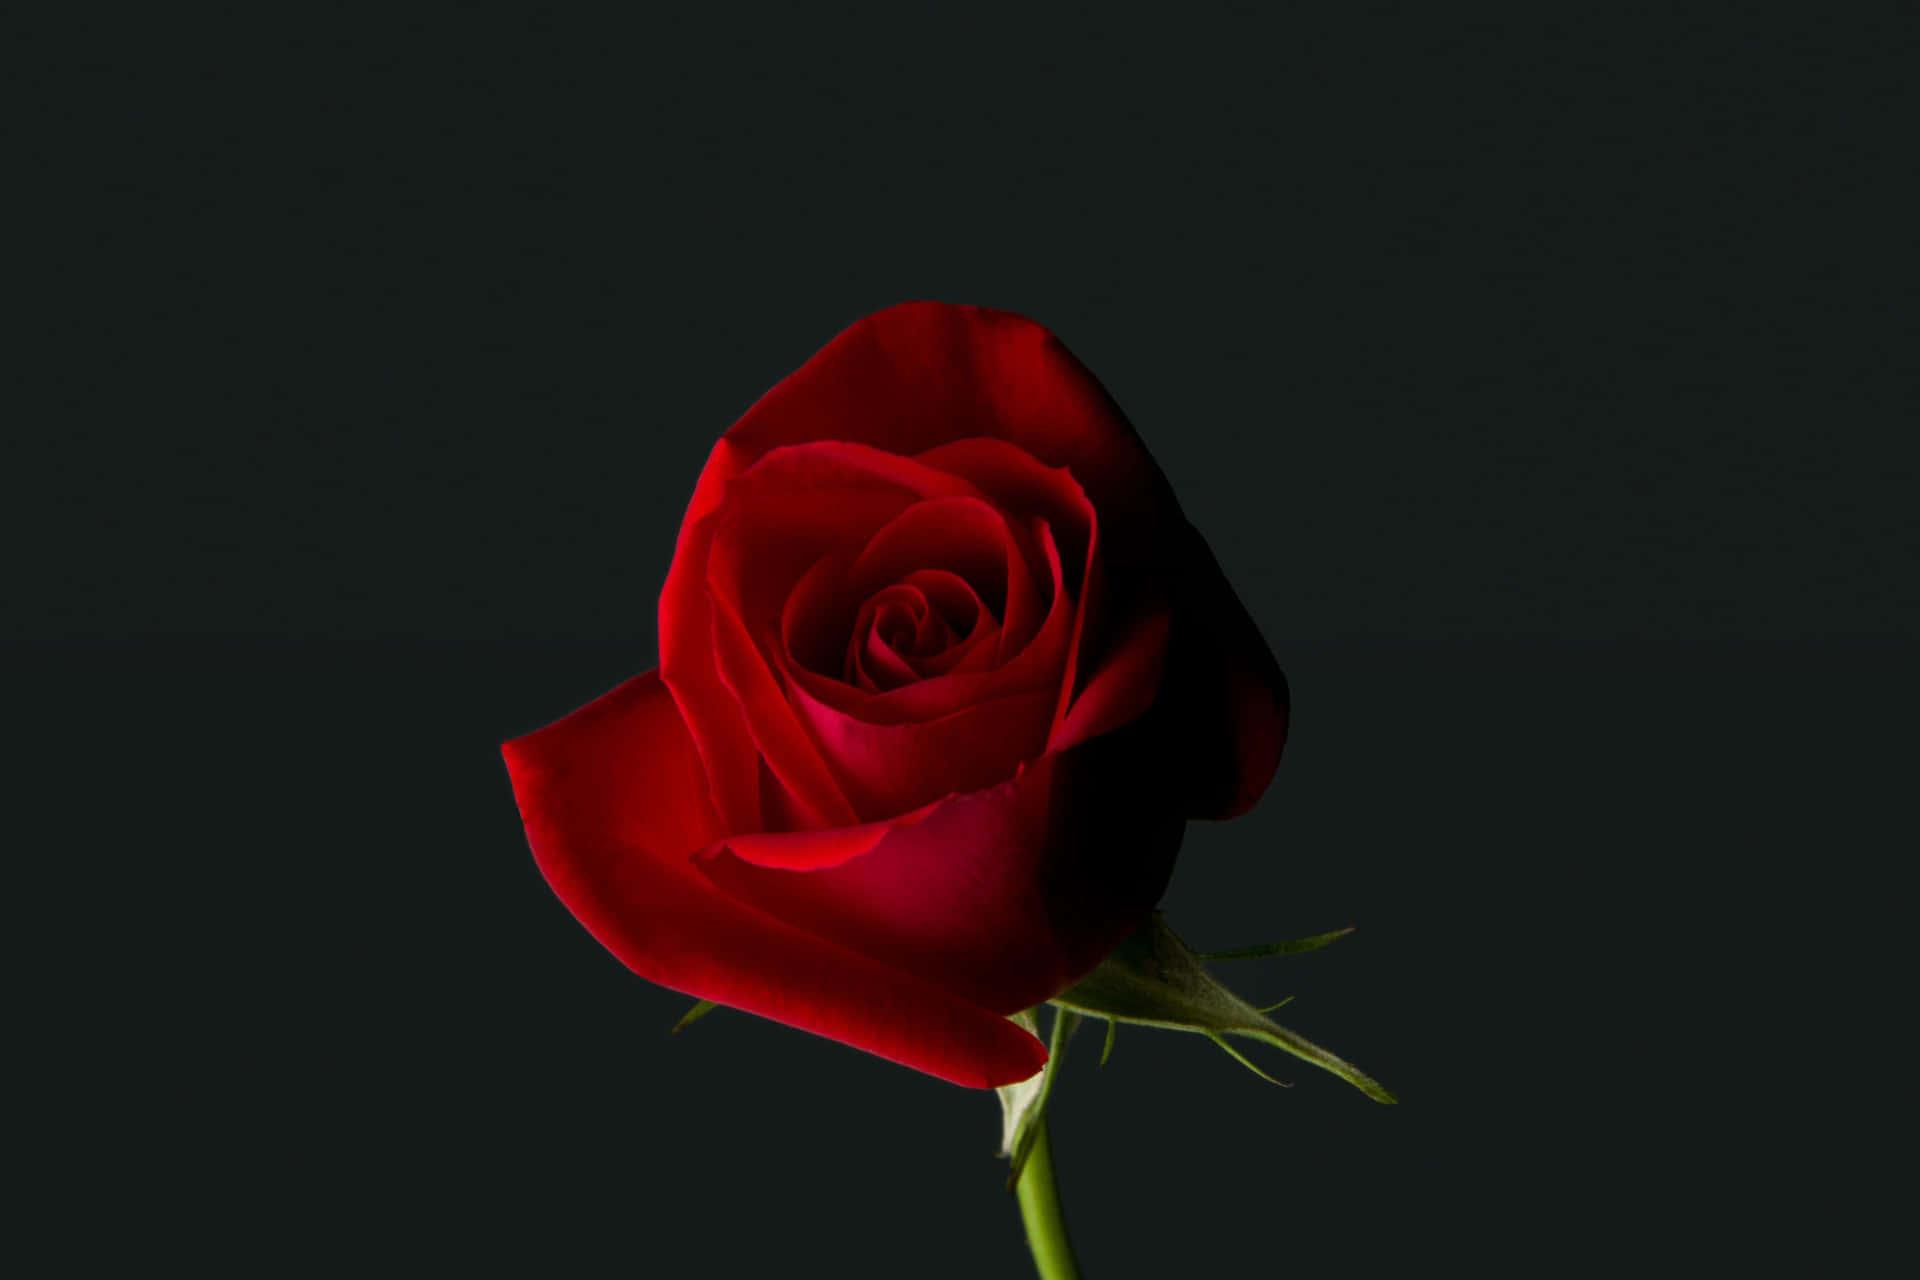 Roses symbolizing eternal love and passion on Valentines Day Wallpaper